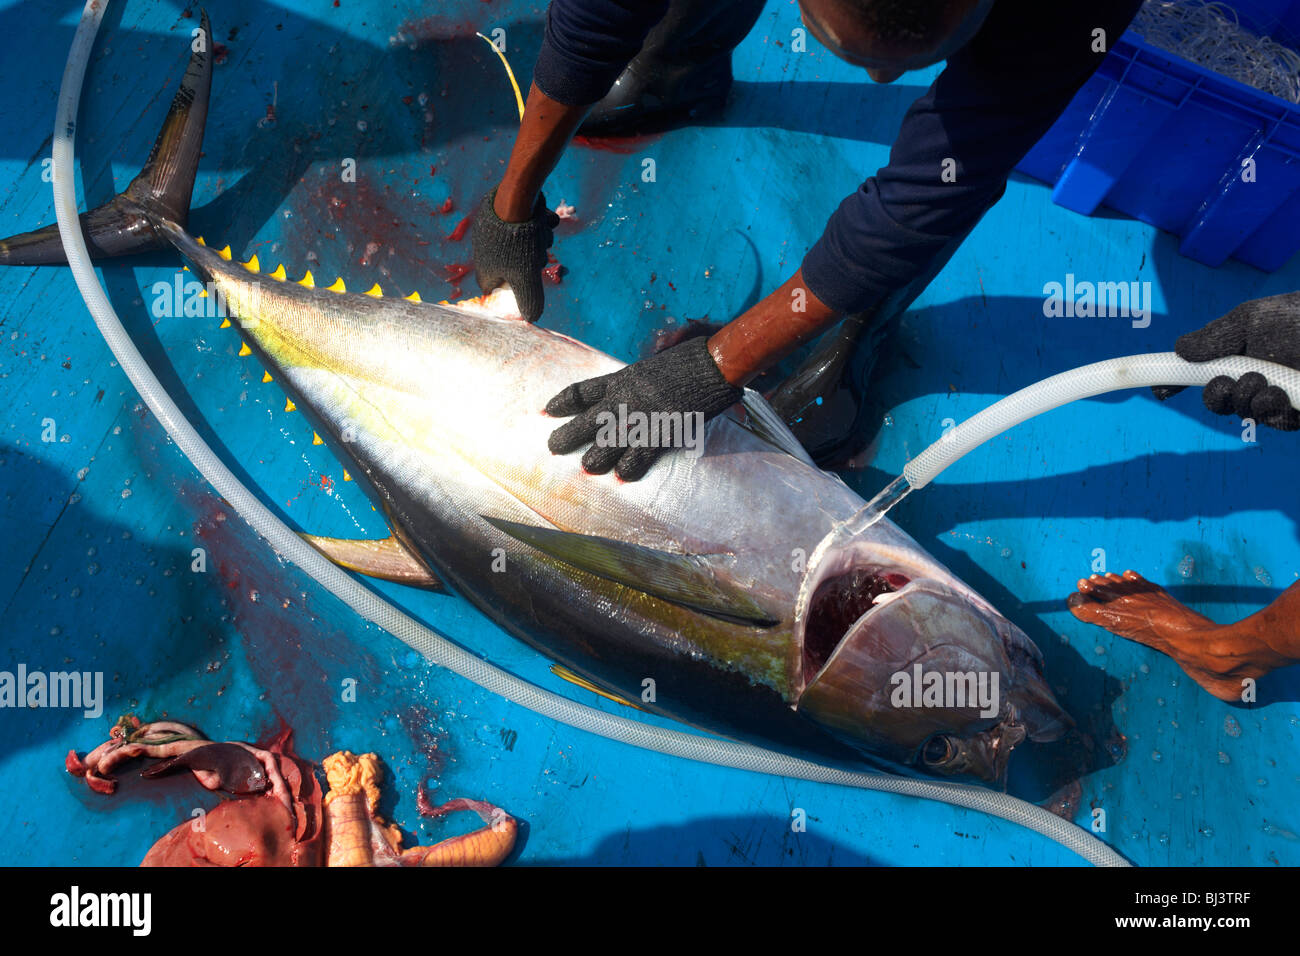 A yellow fin tuna is hosed down while dead on the floor of a dhoni boat in the Indian Ocean. Stock Photo